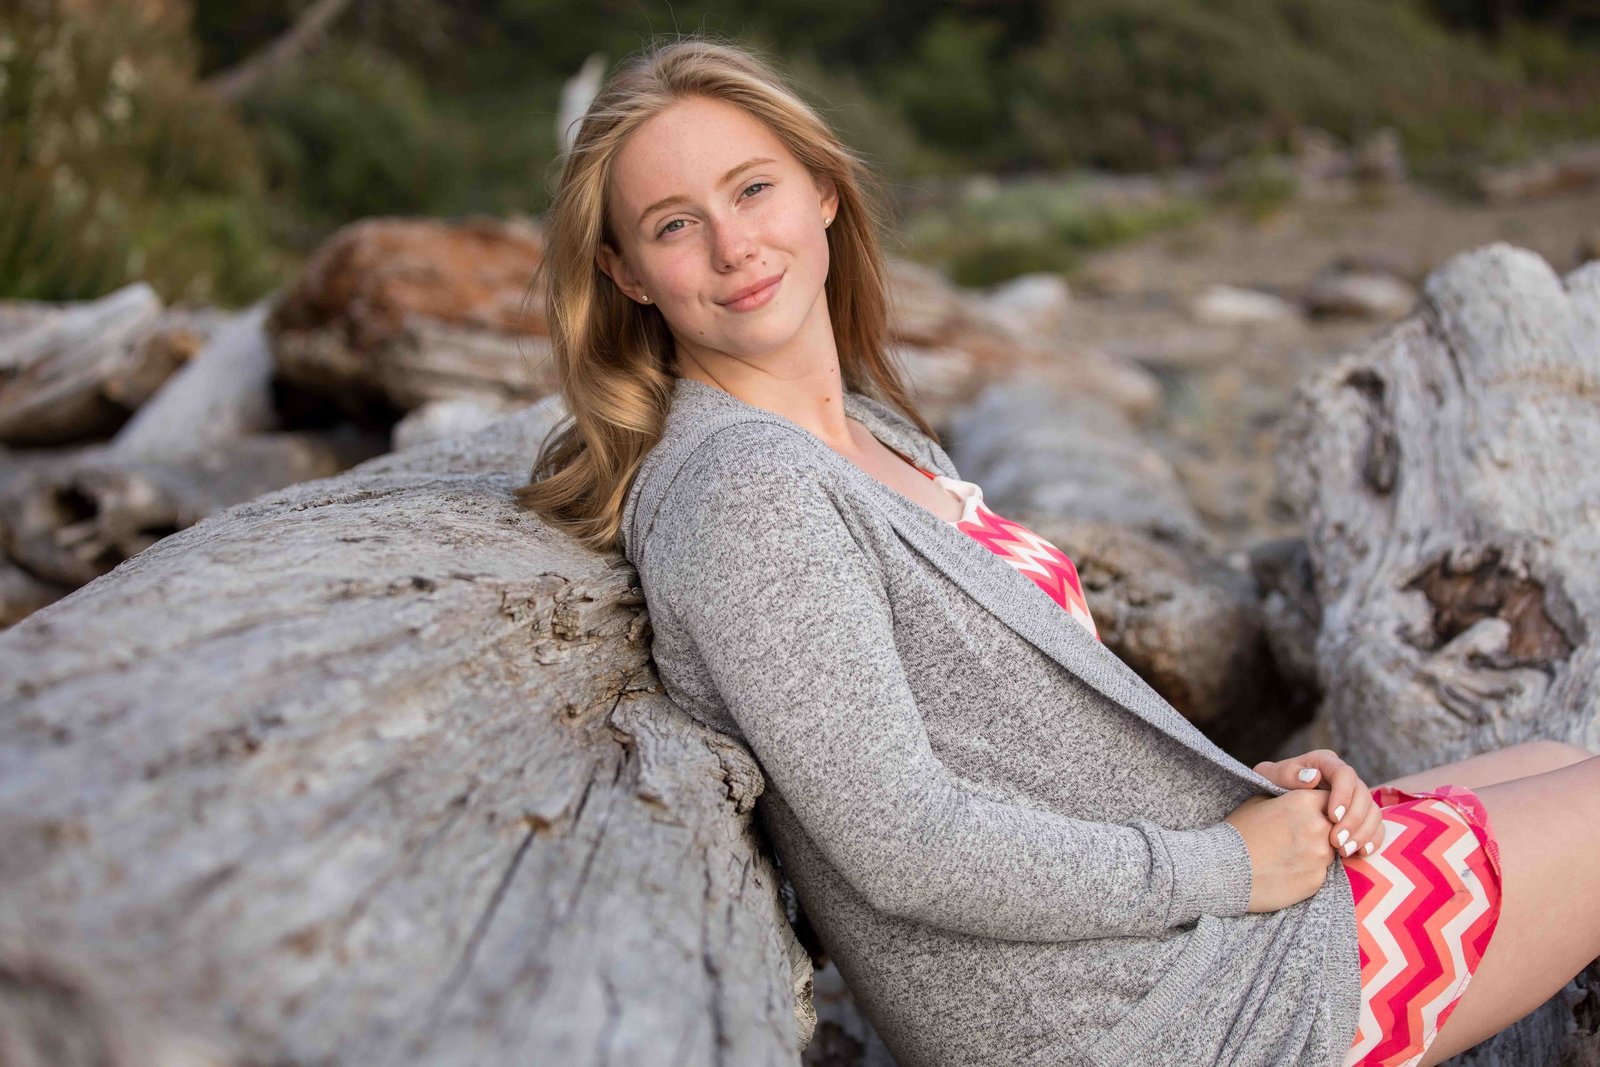 A young girl has her back to a piece of driftwood. She has a small smile on her face this was her senior photo session with senior photographer JodyRae. They are at hug point State Park and she is wearing a pink dress with white stripes